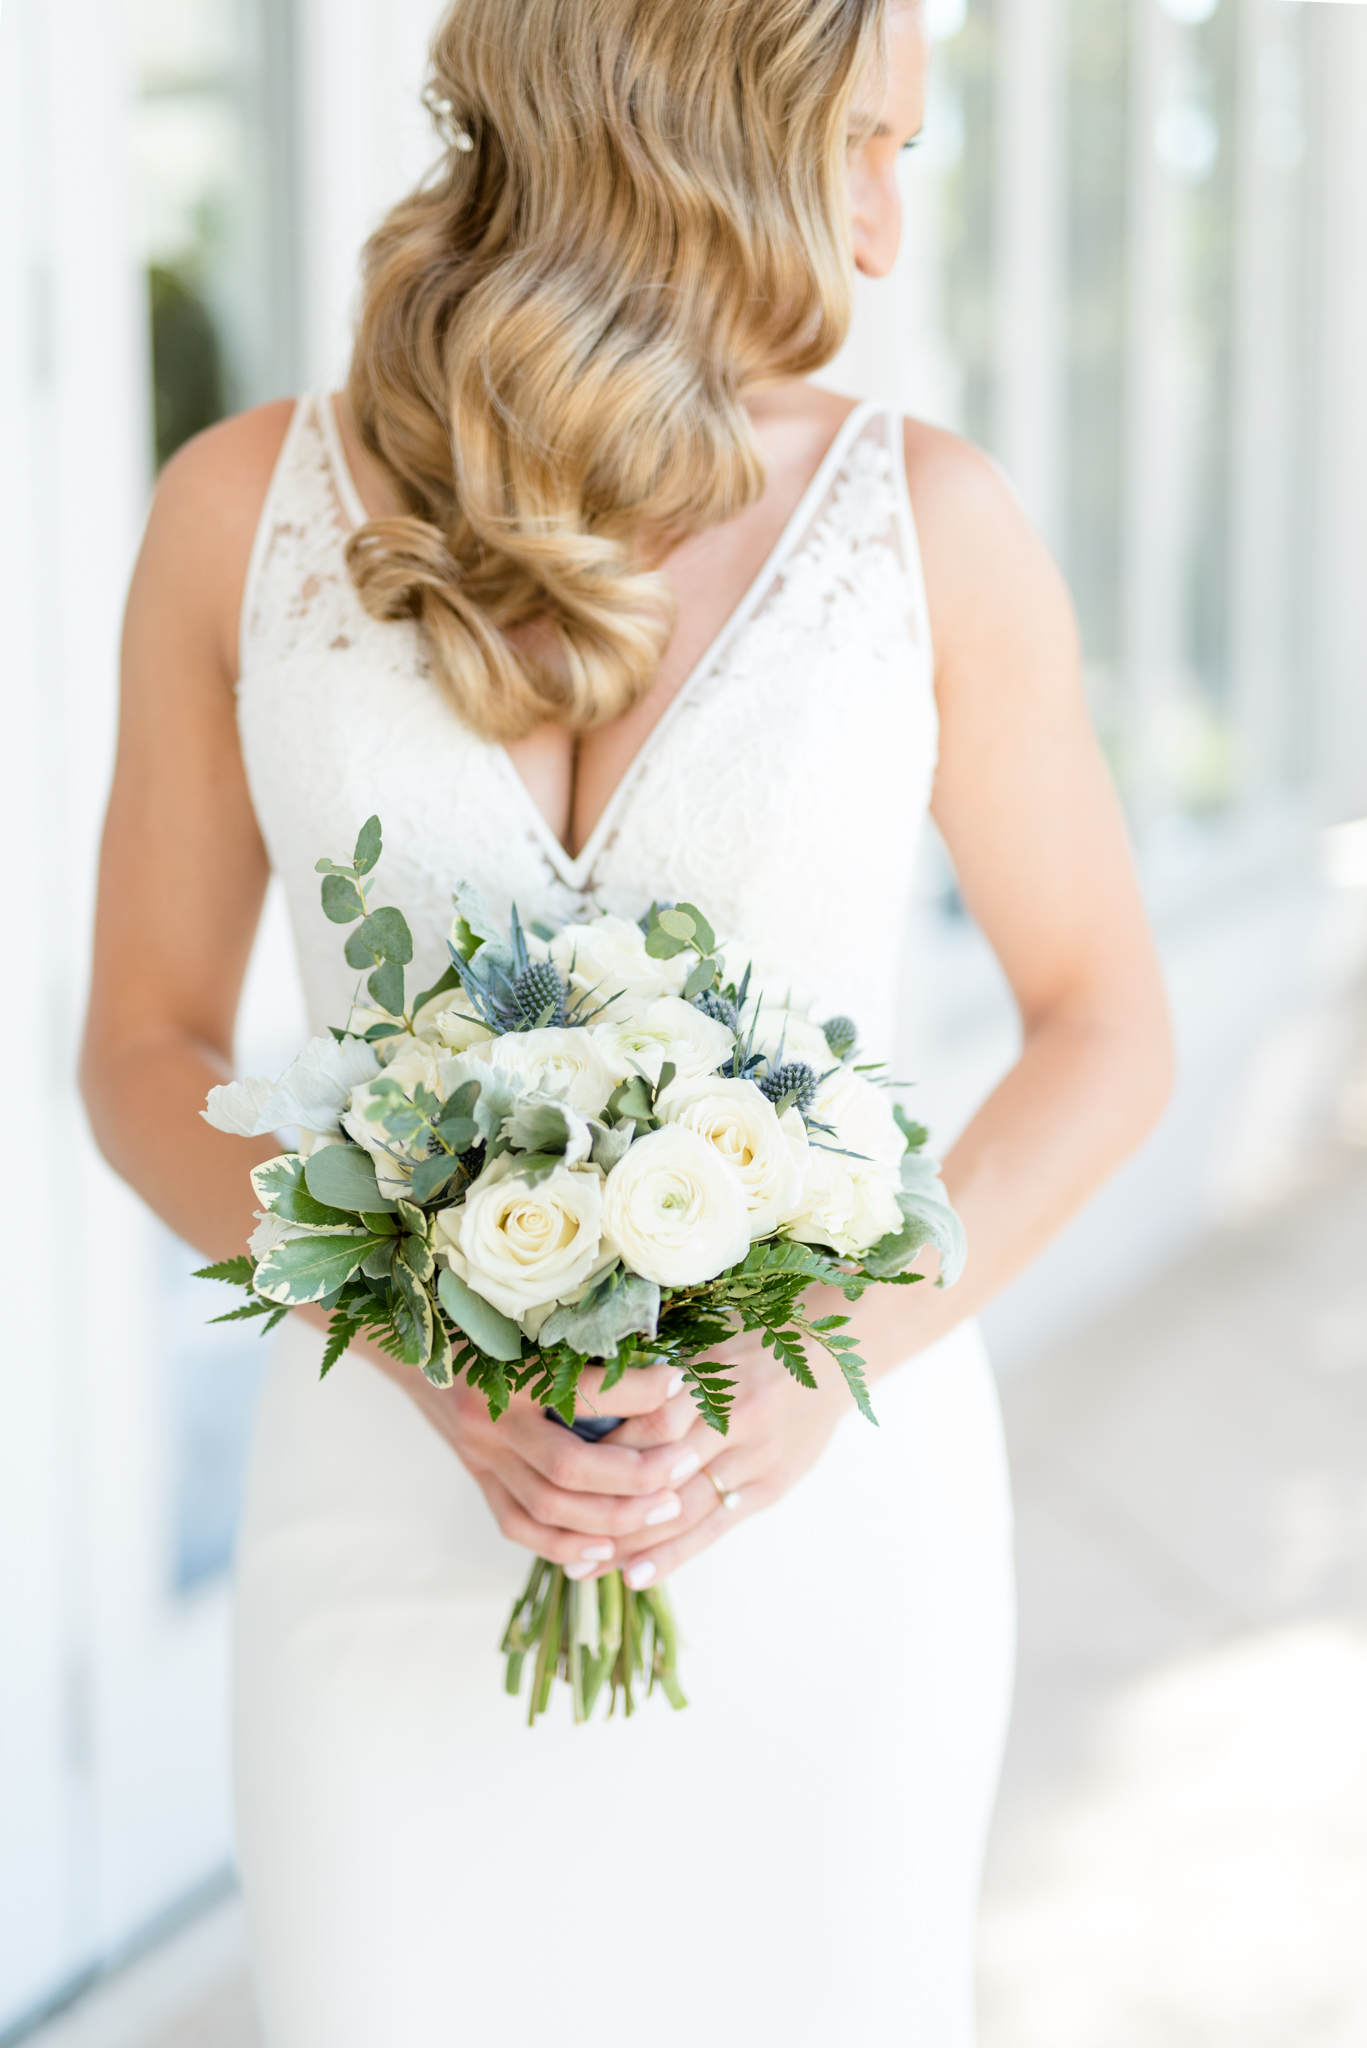 Bride holds flowers and looks over shoulder.